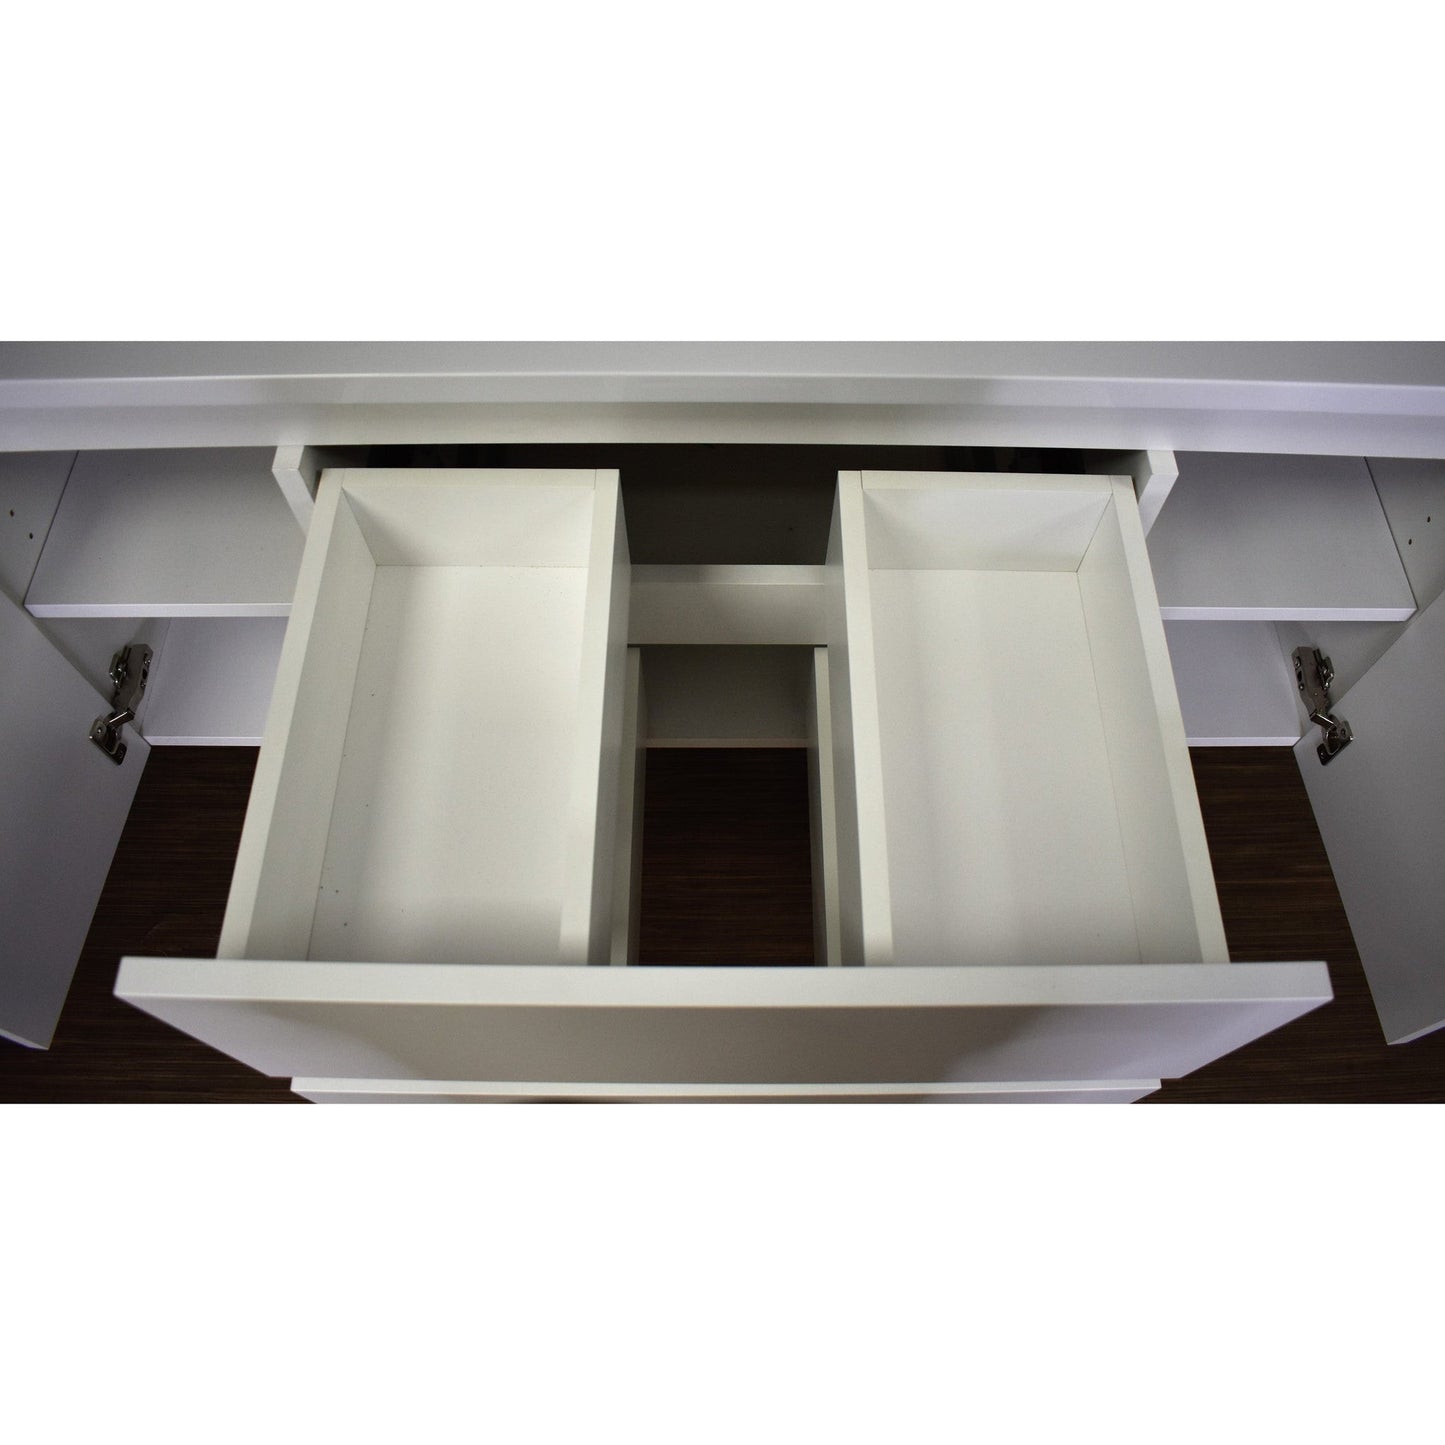 Volpa USA Salt 48" x 20" Glossy White Wall-Mounted Floating Bathroom Vanity Cabinet with Drawers